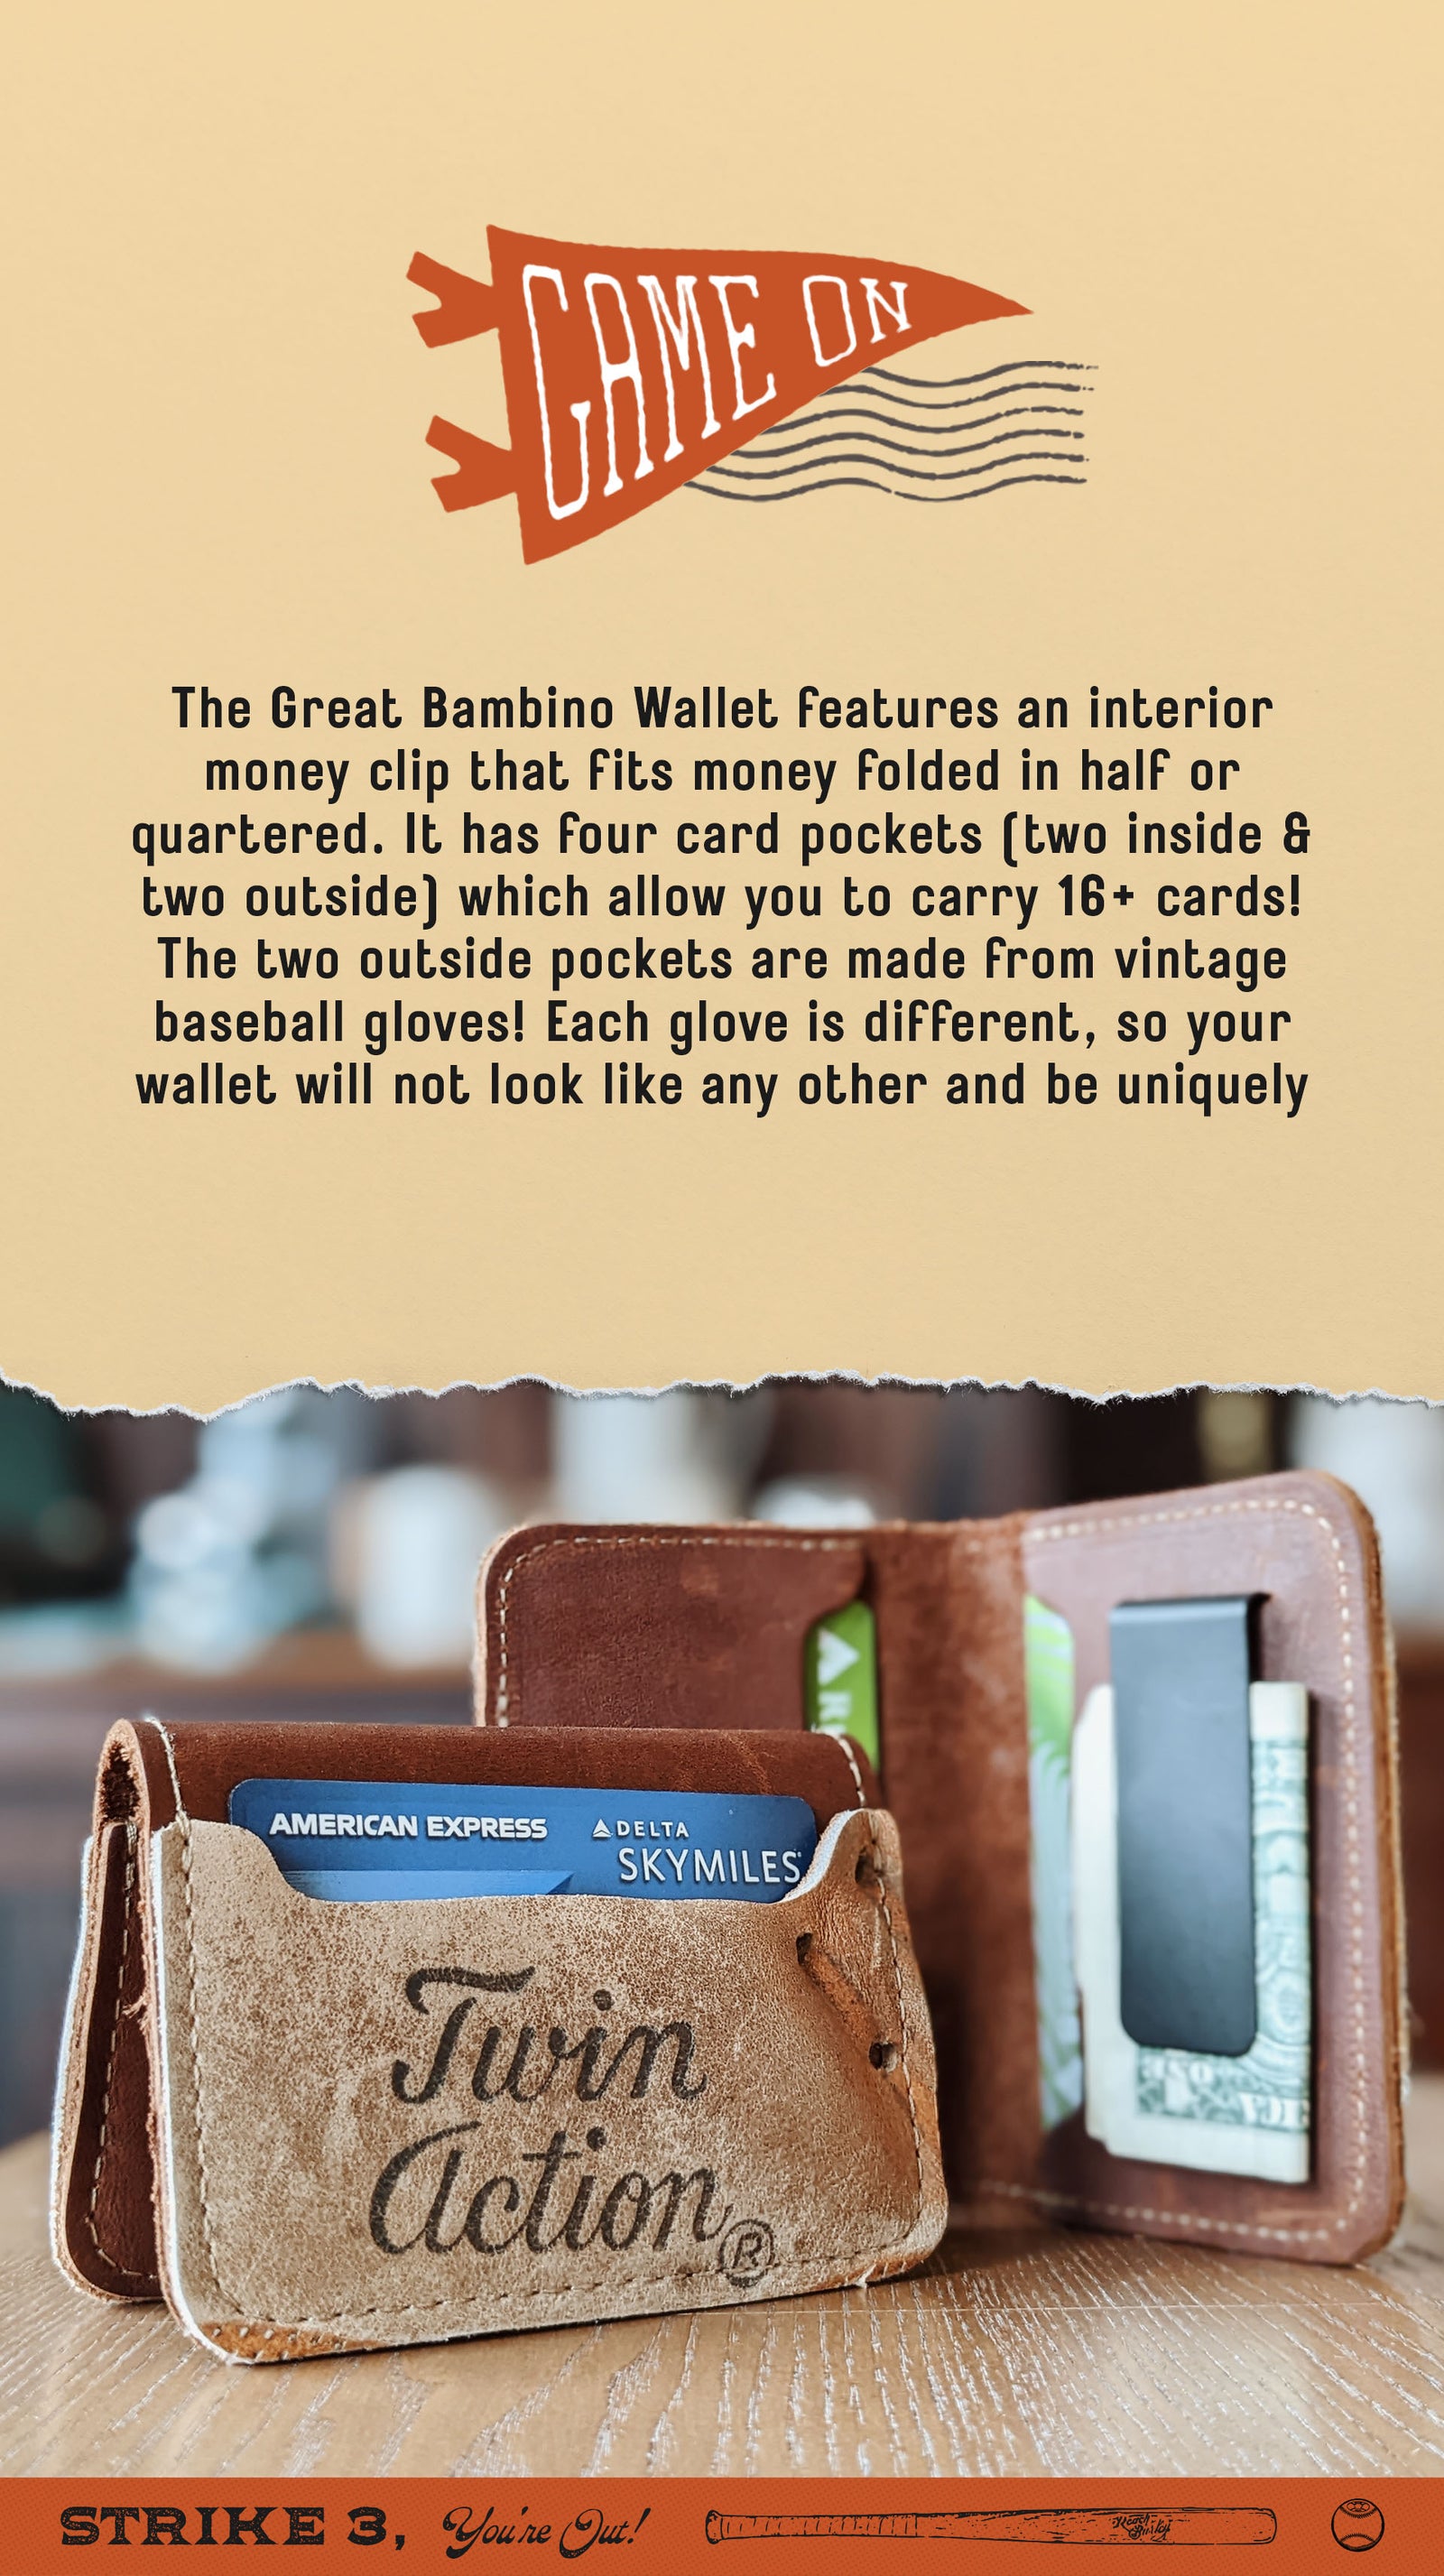 Repurposed Baseball Glove Leather Wallet Handcrafted From Old